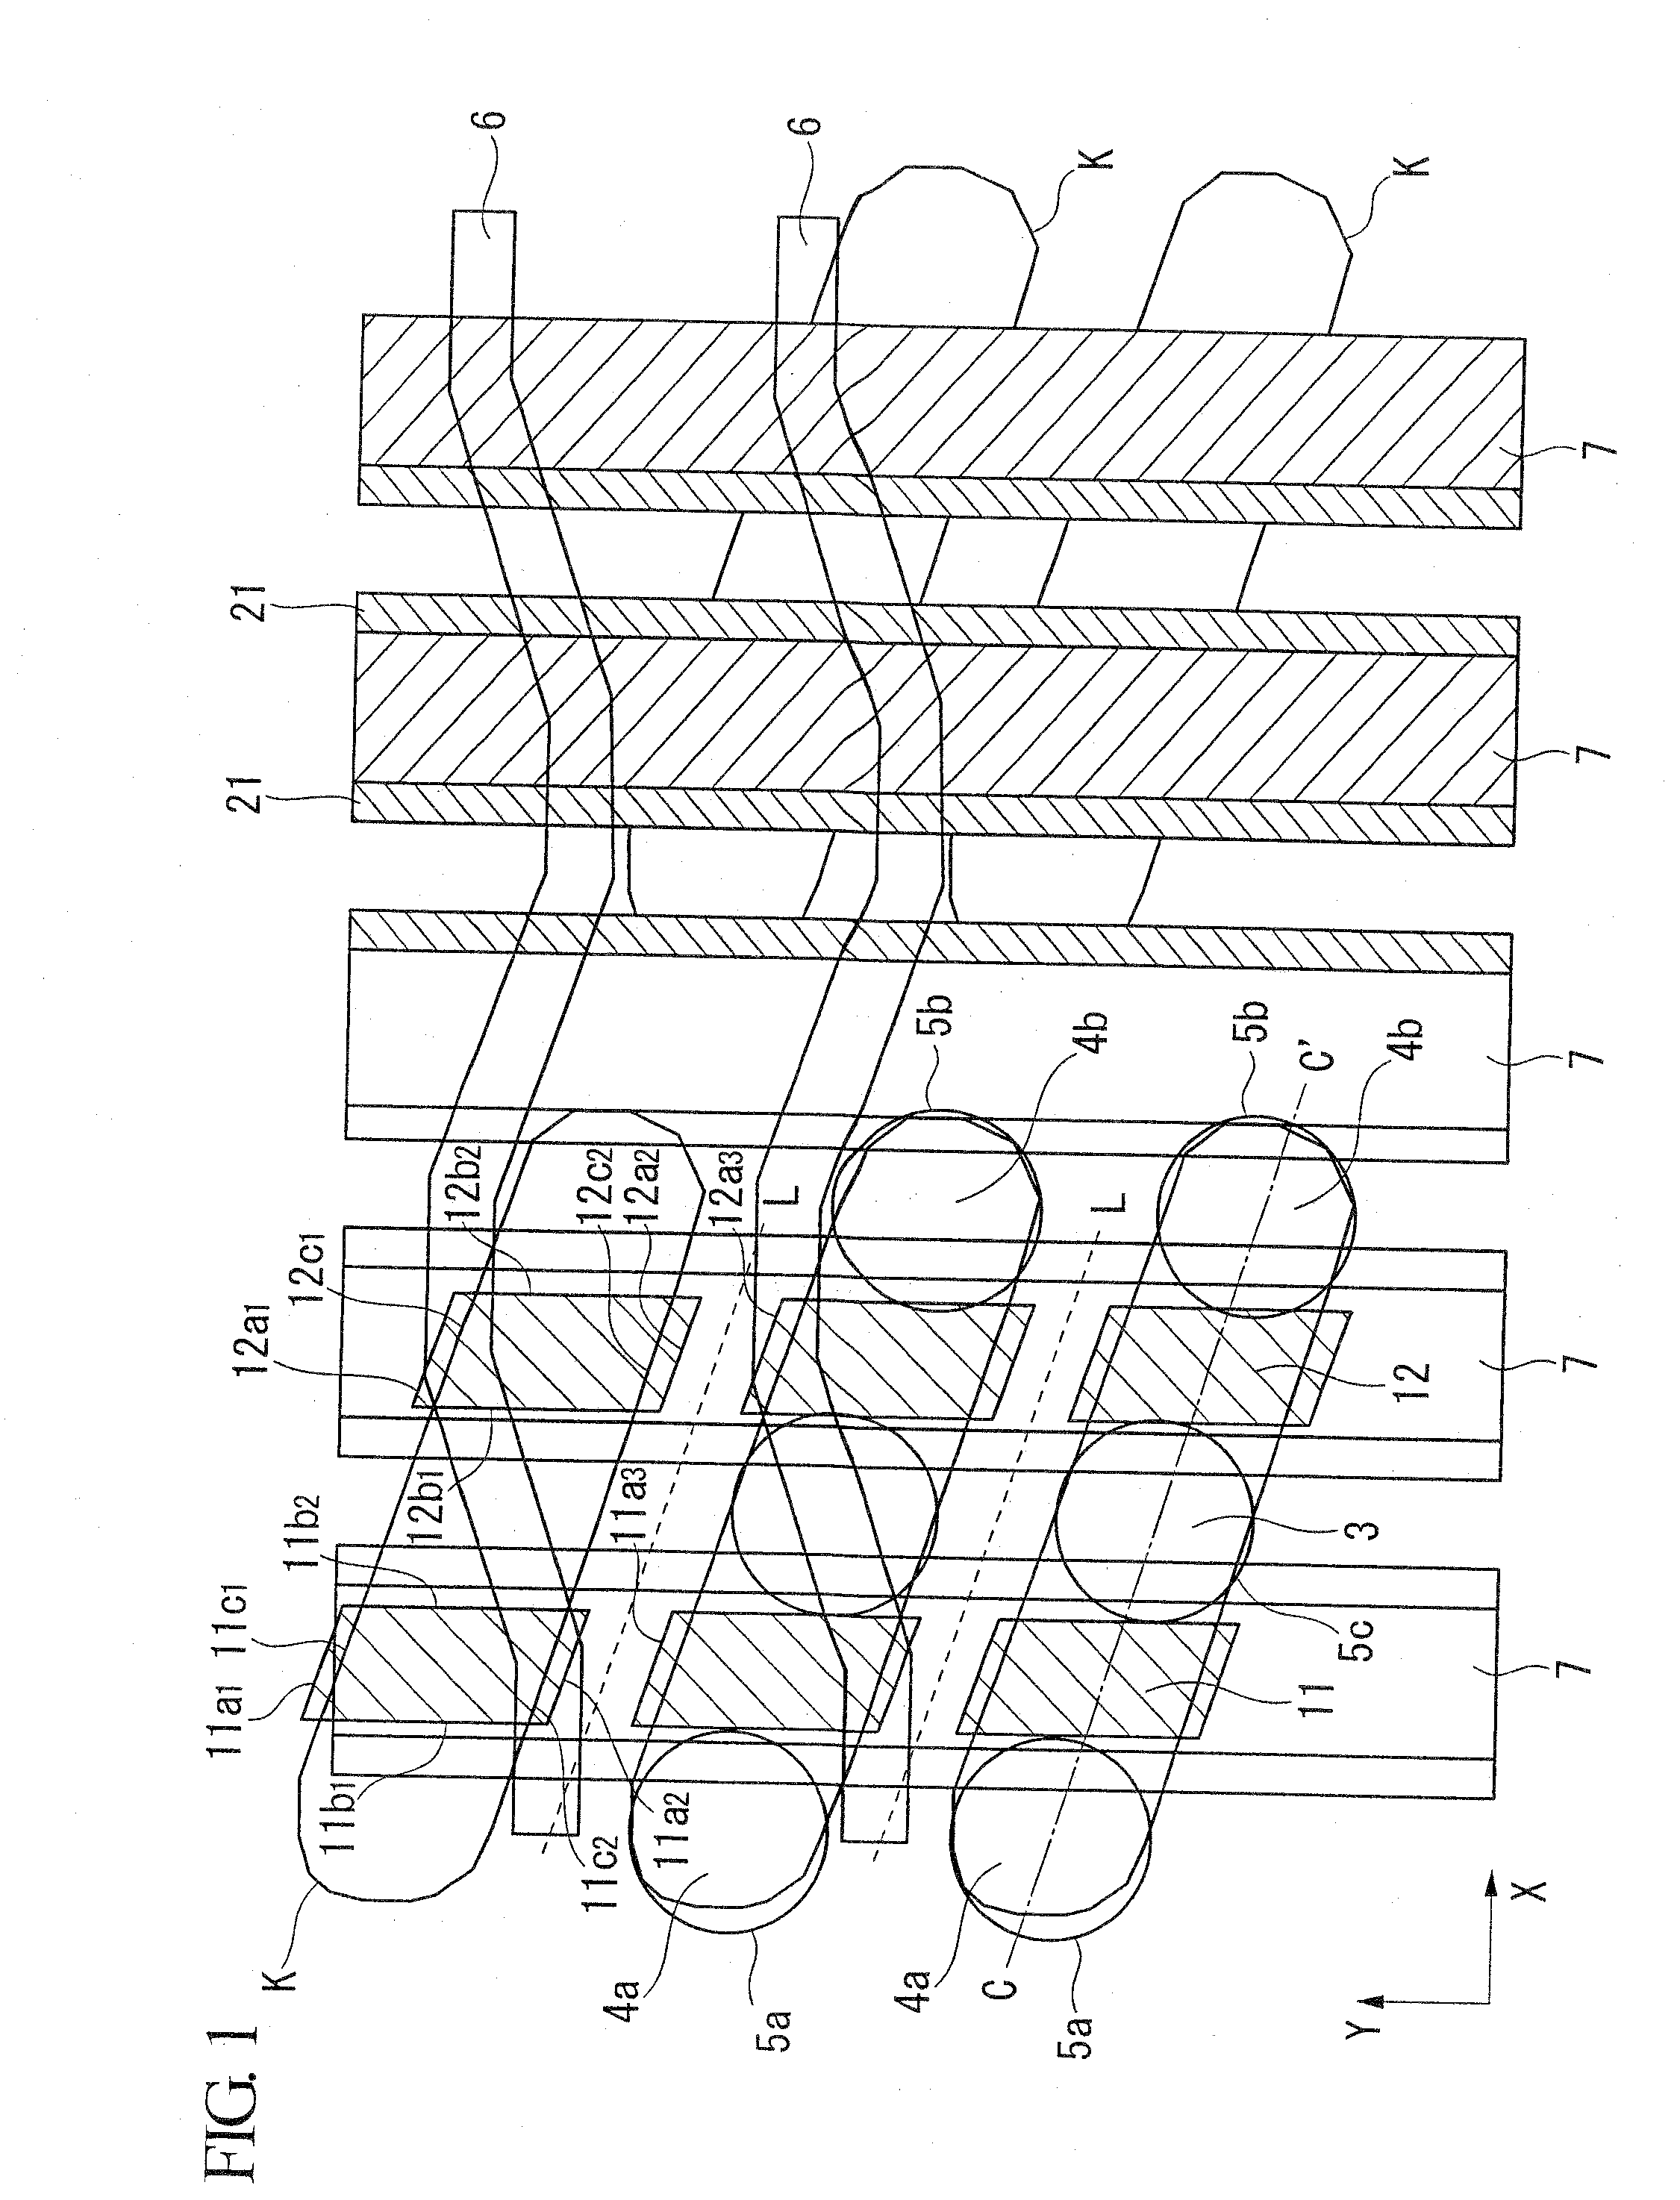 Semiconductor device and method of forming the same